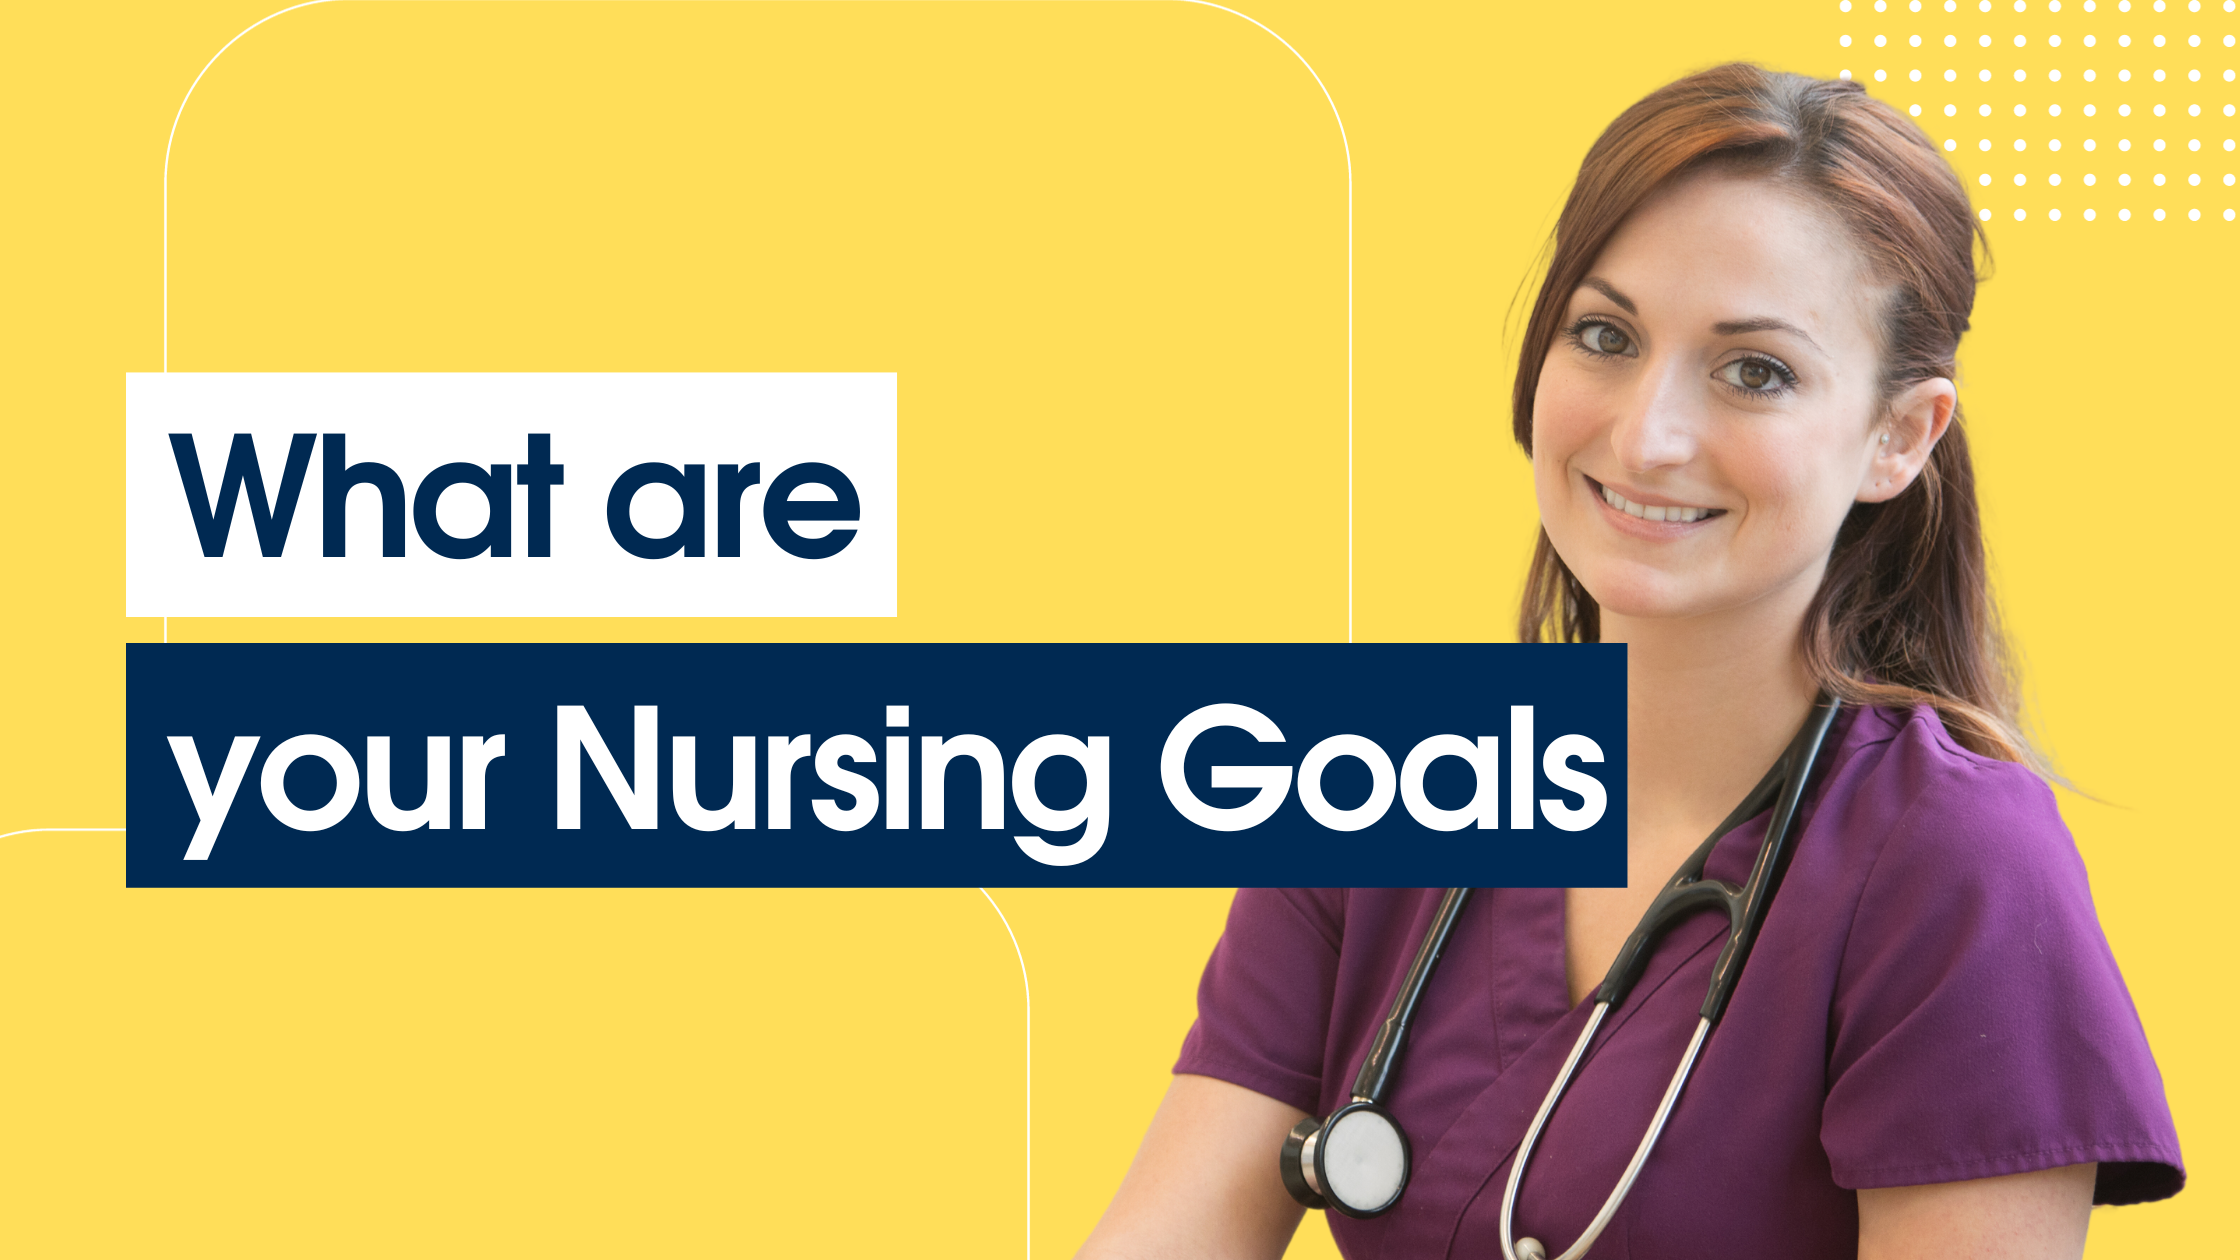 What are your Nursing Goals?